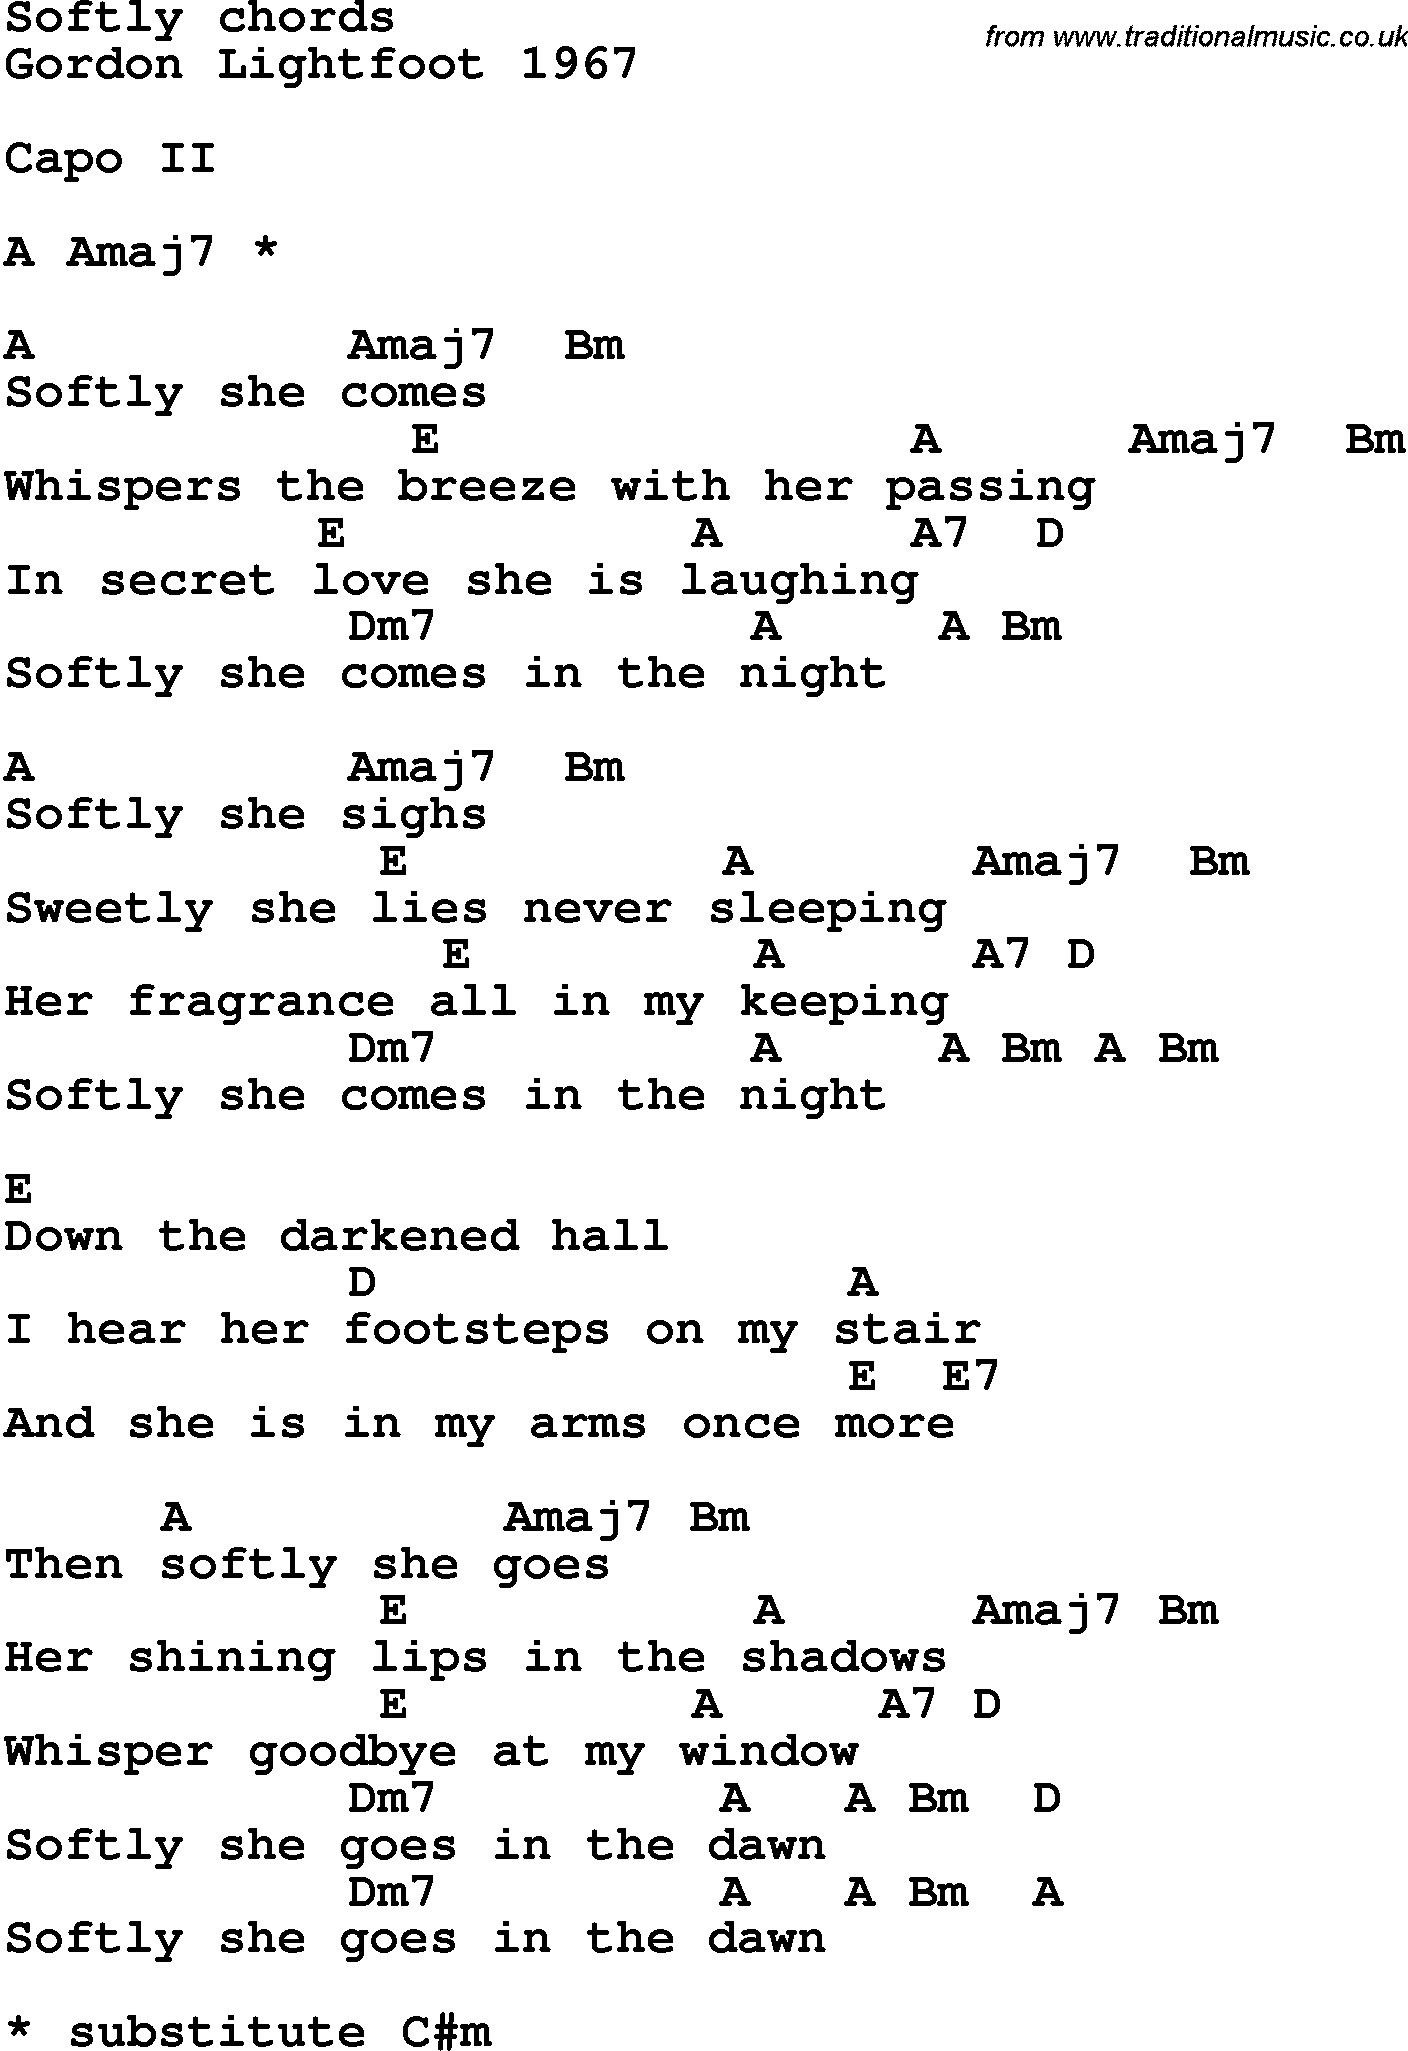 Song Lyrics with guitar chords for Softly